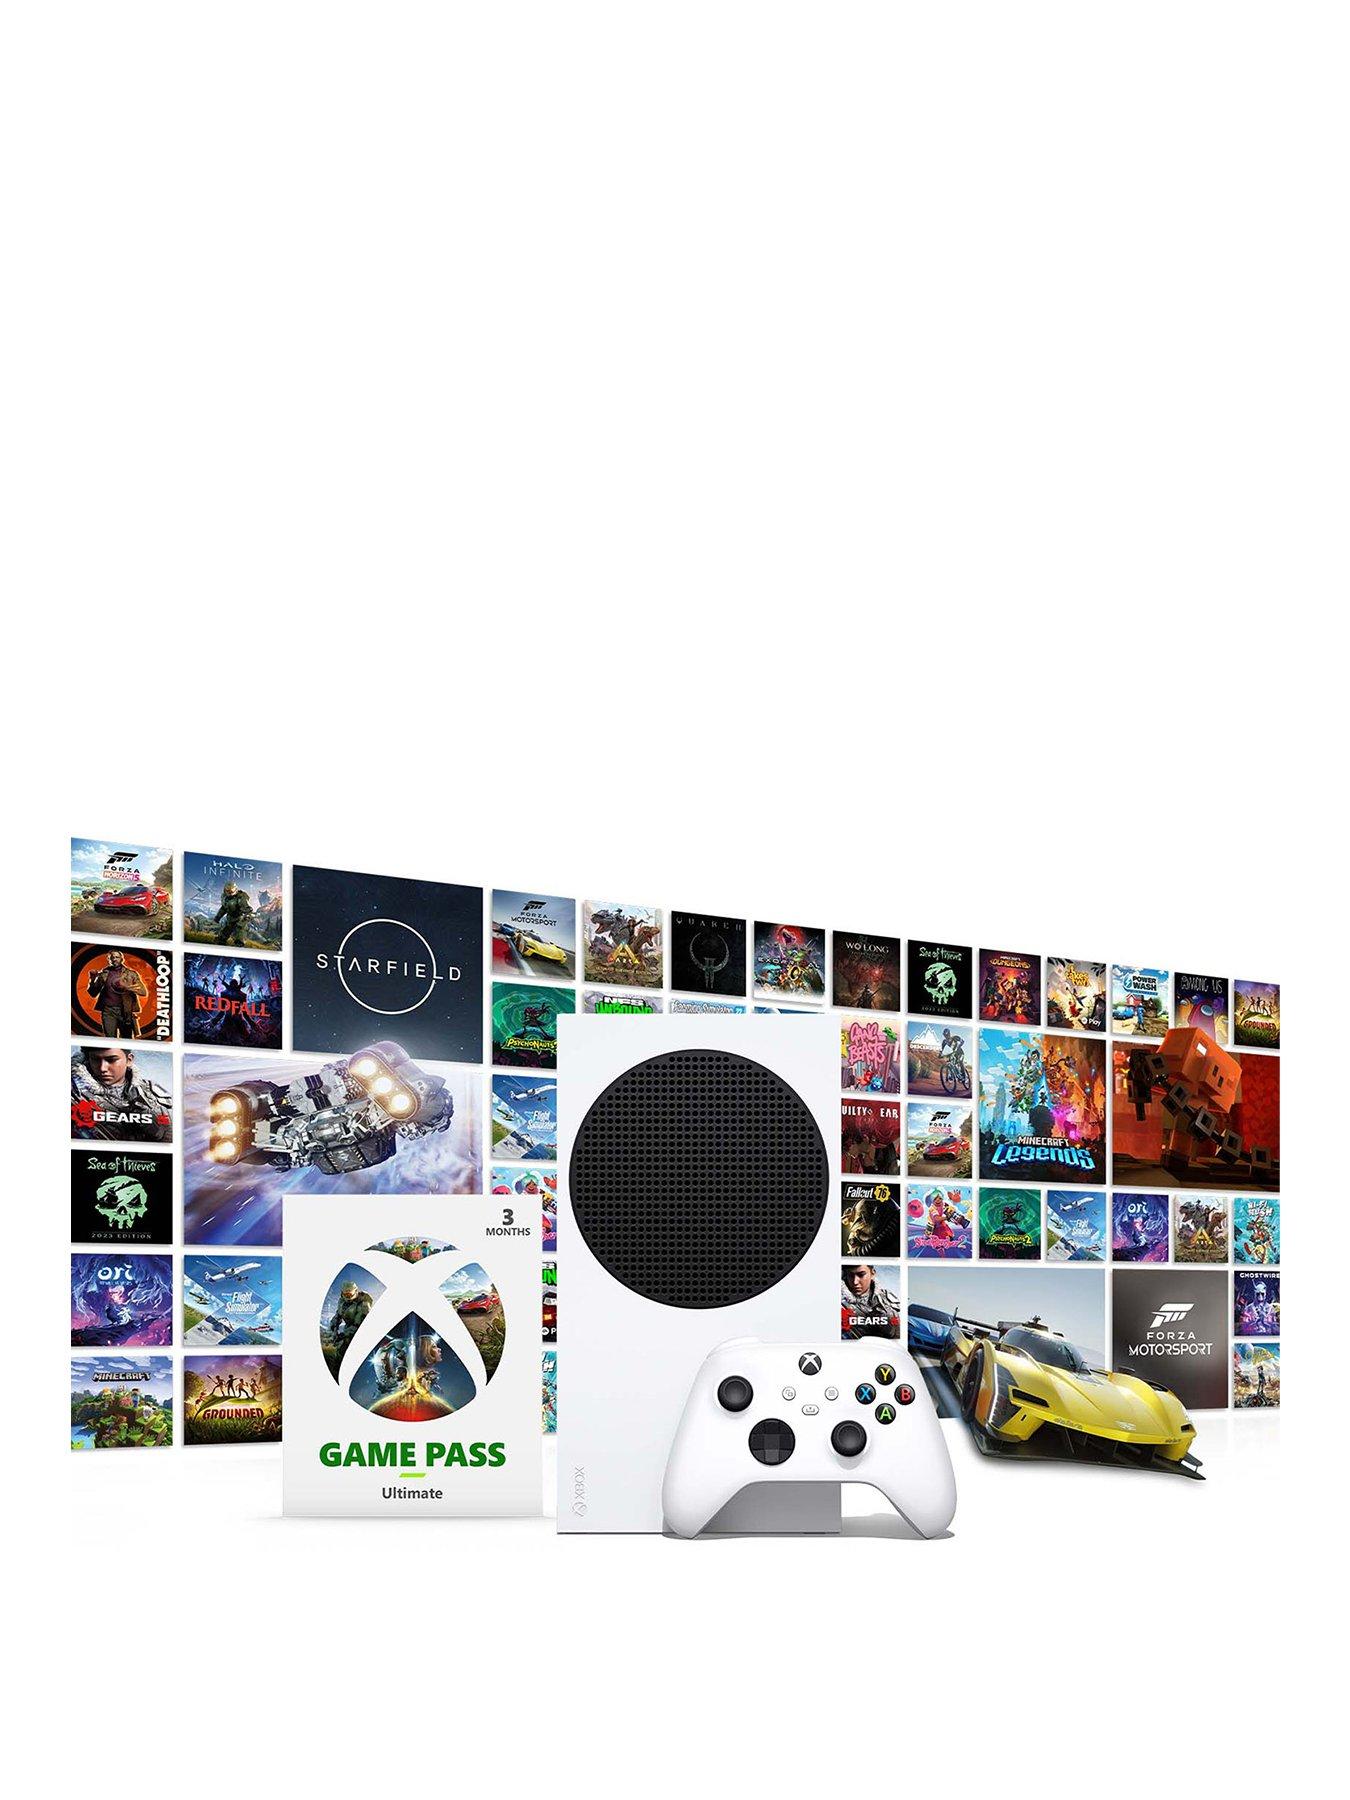 Xbox One S Roblox bundle now available - Gaming Age